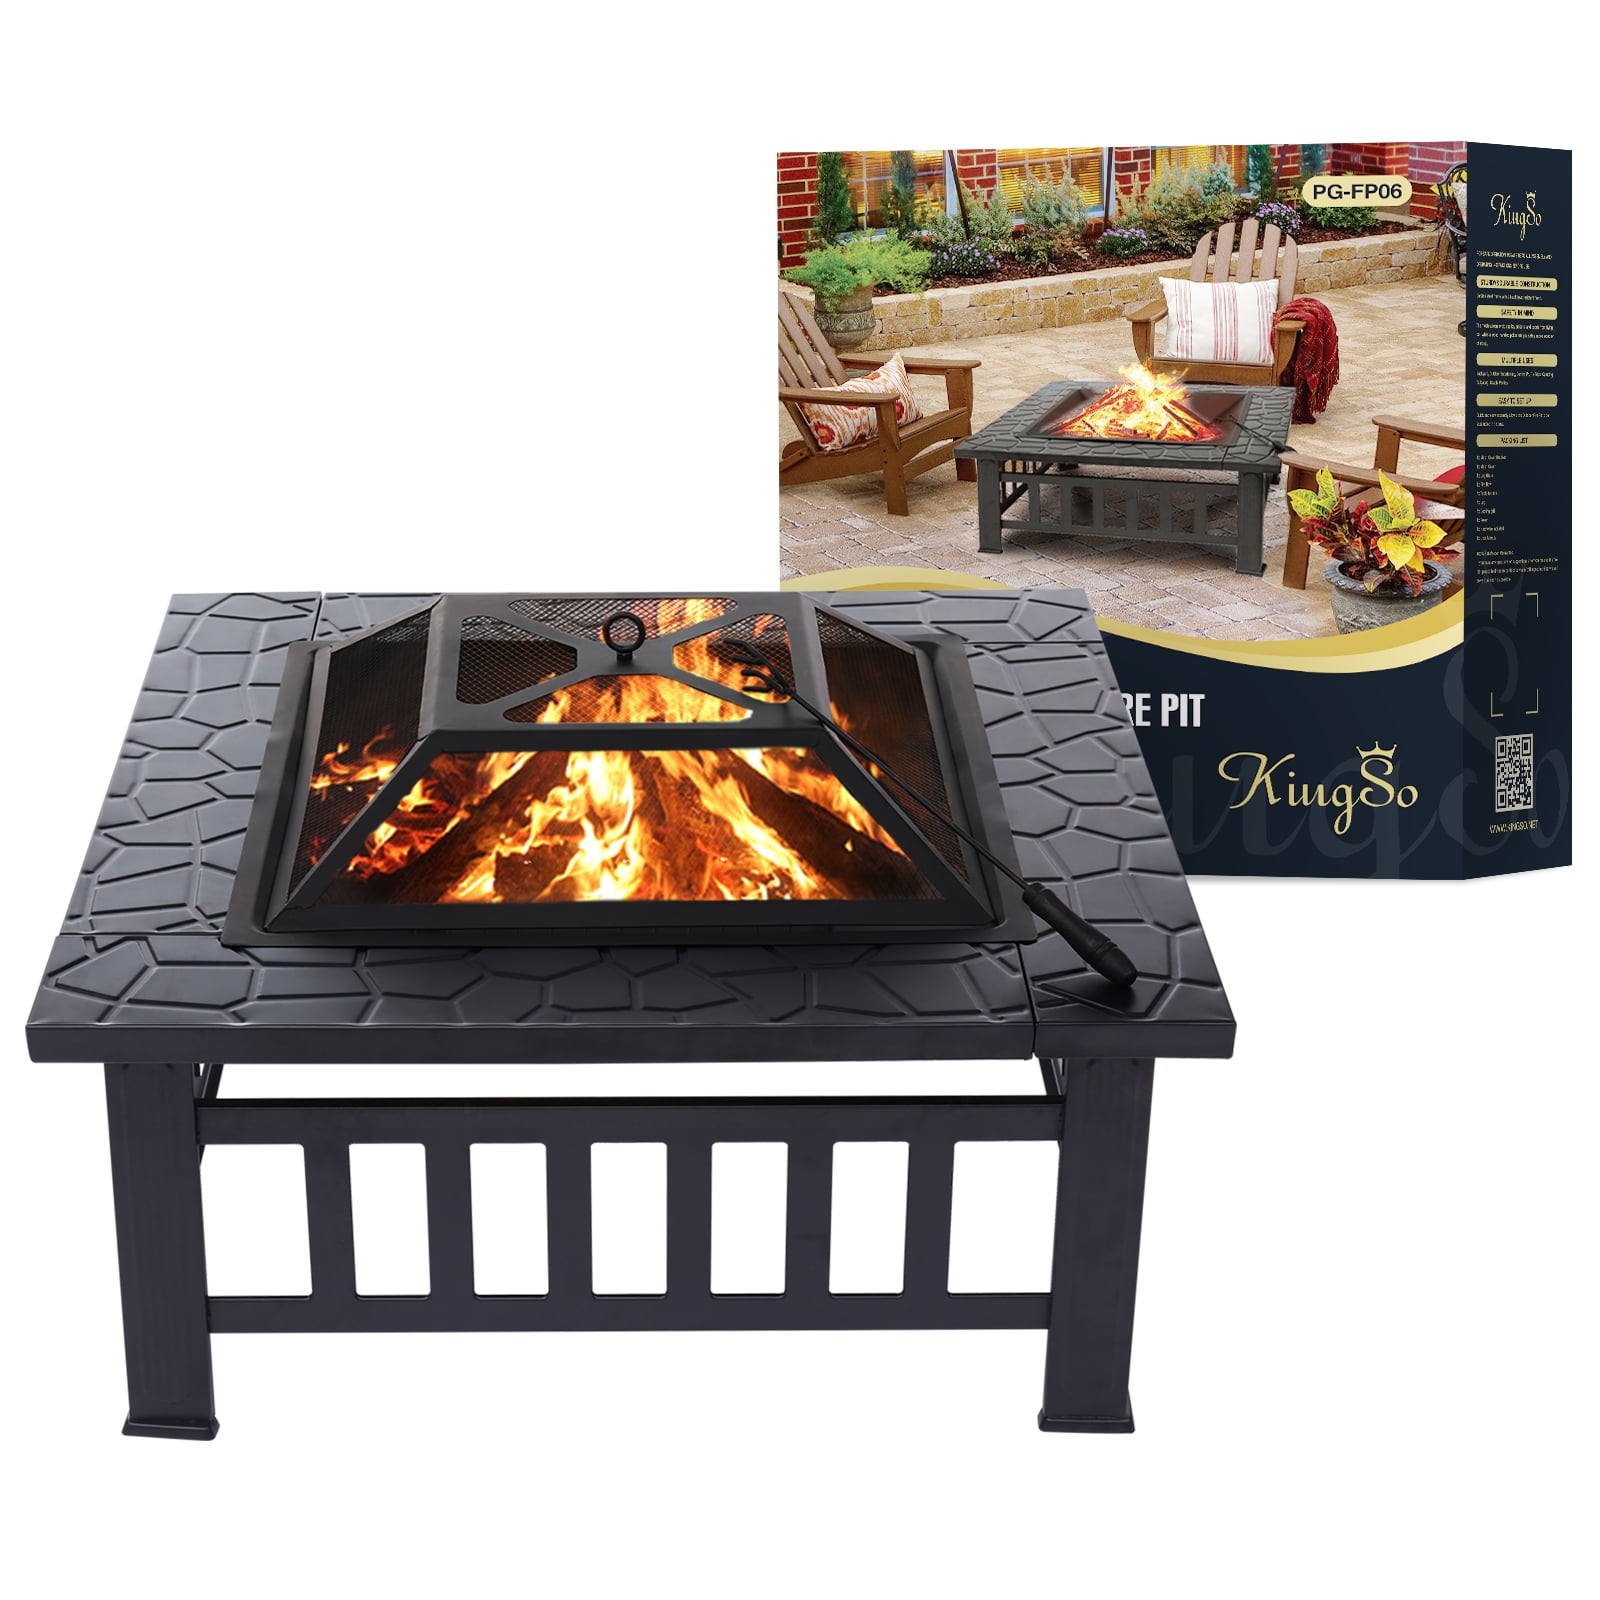 32" Wood Burning Fire Pit Outdoor Garden Patio BBQ Grill Square Stove W/ Cover 